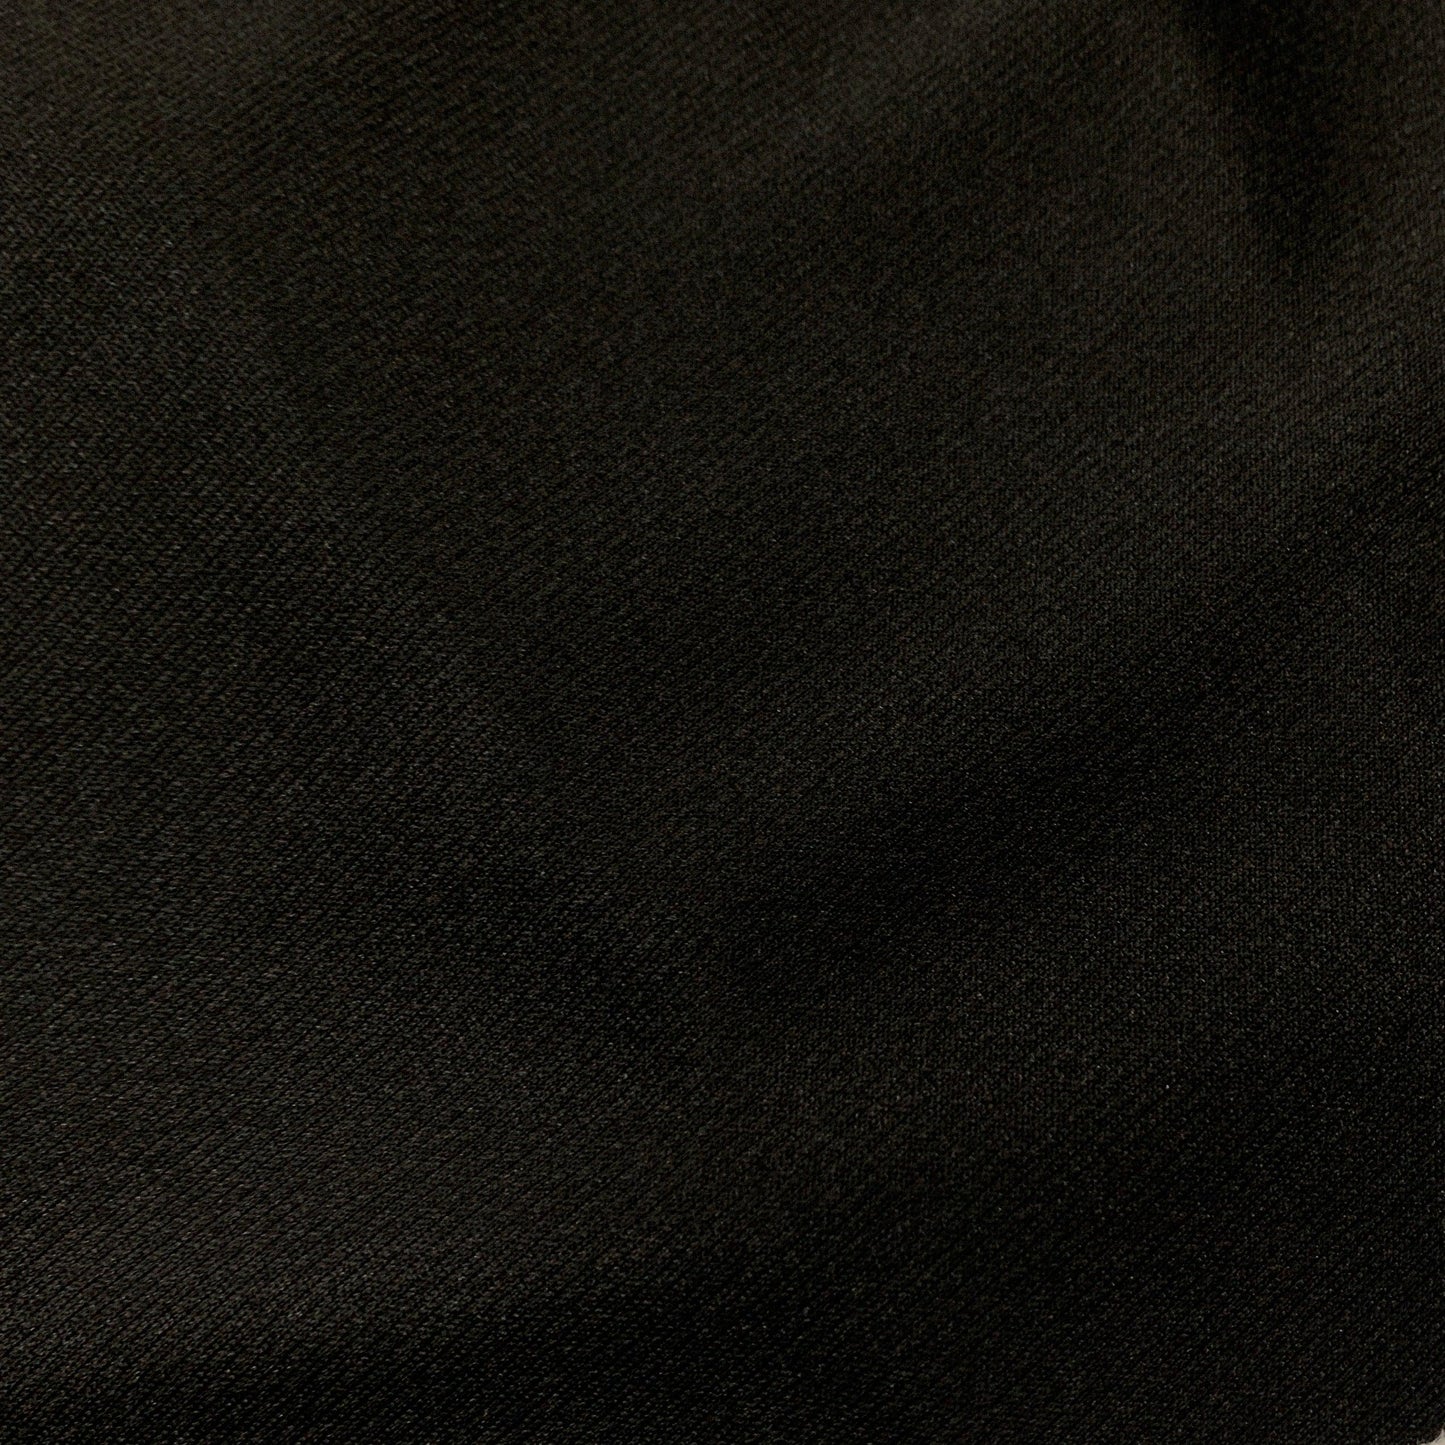 Black Polyester Athletic Wicking Jersey Fabric - Nature's Fabrics